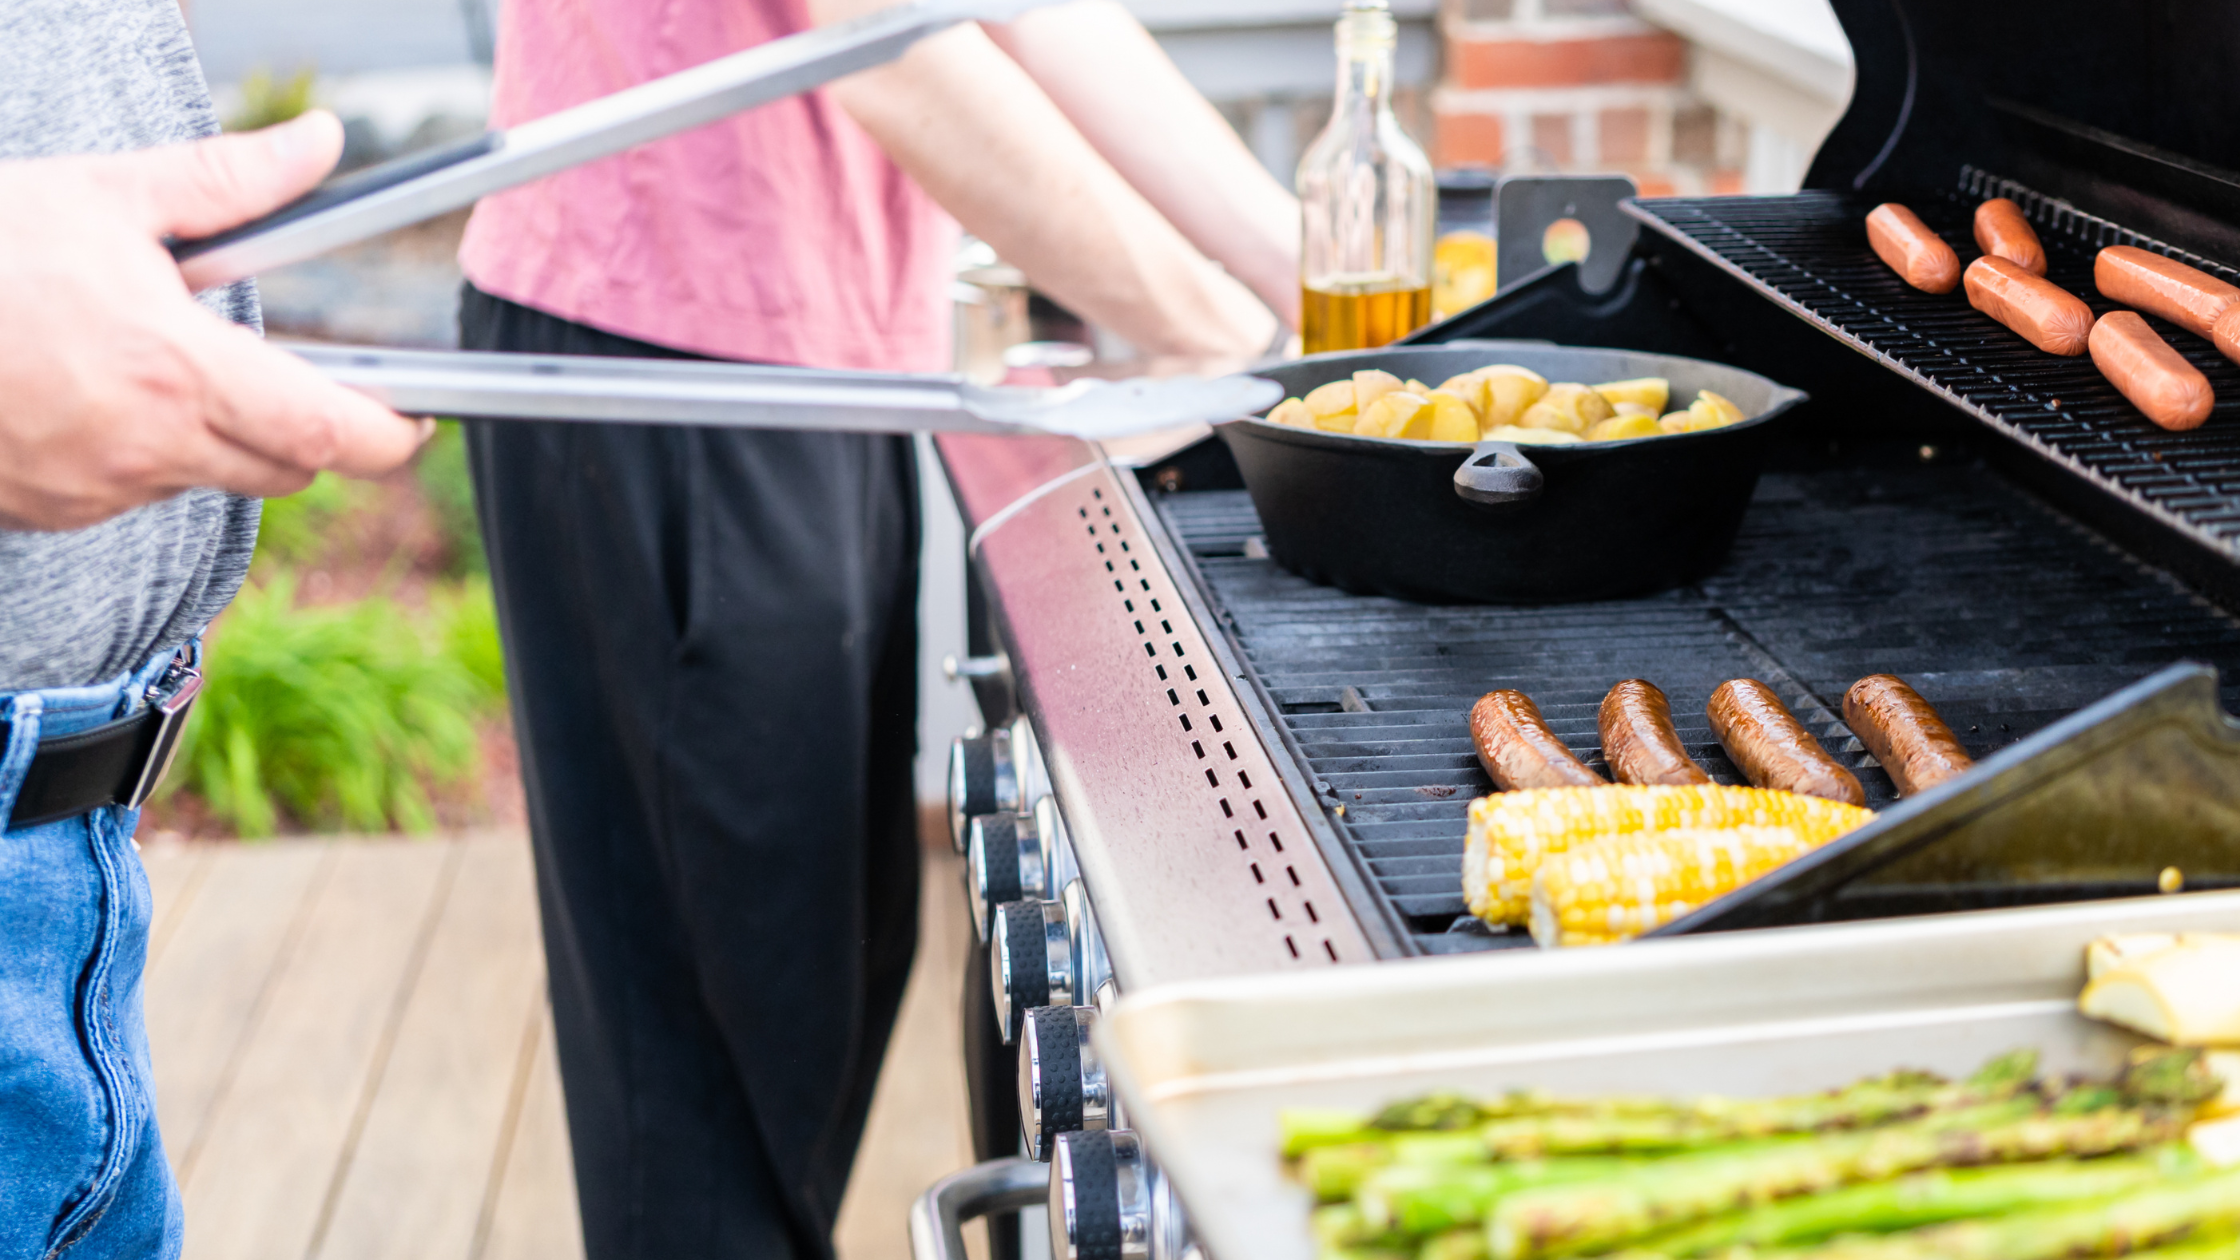 Propane Grill Safety Tips and Summer Grilling Recipes